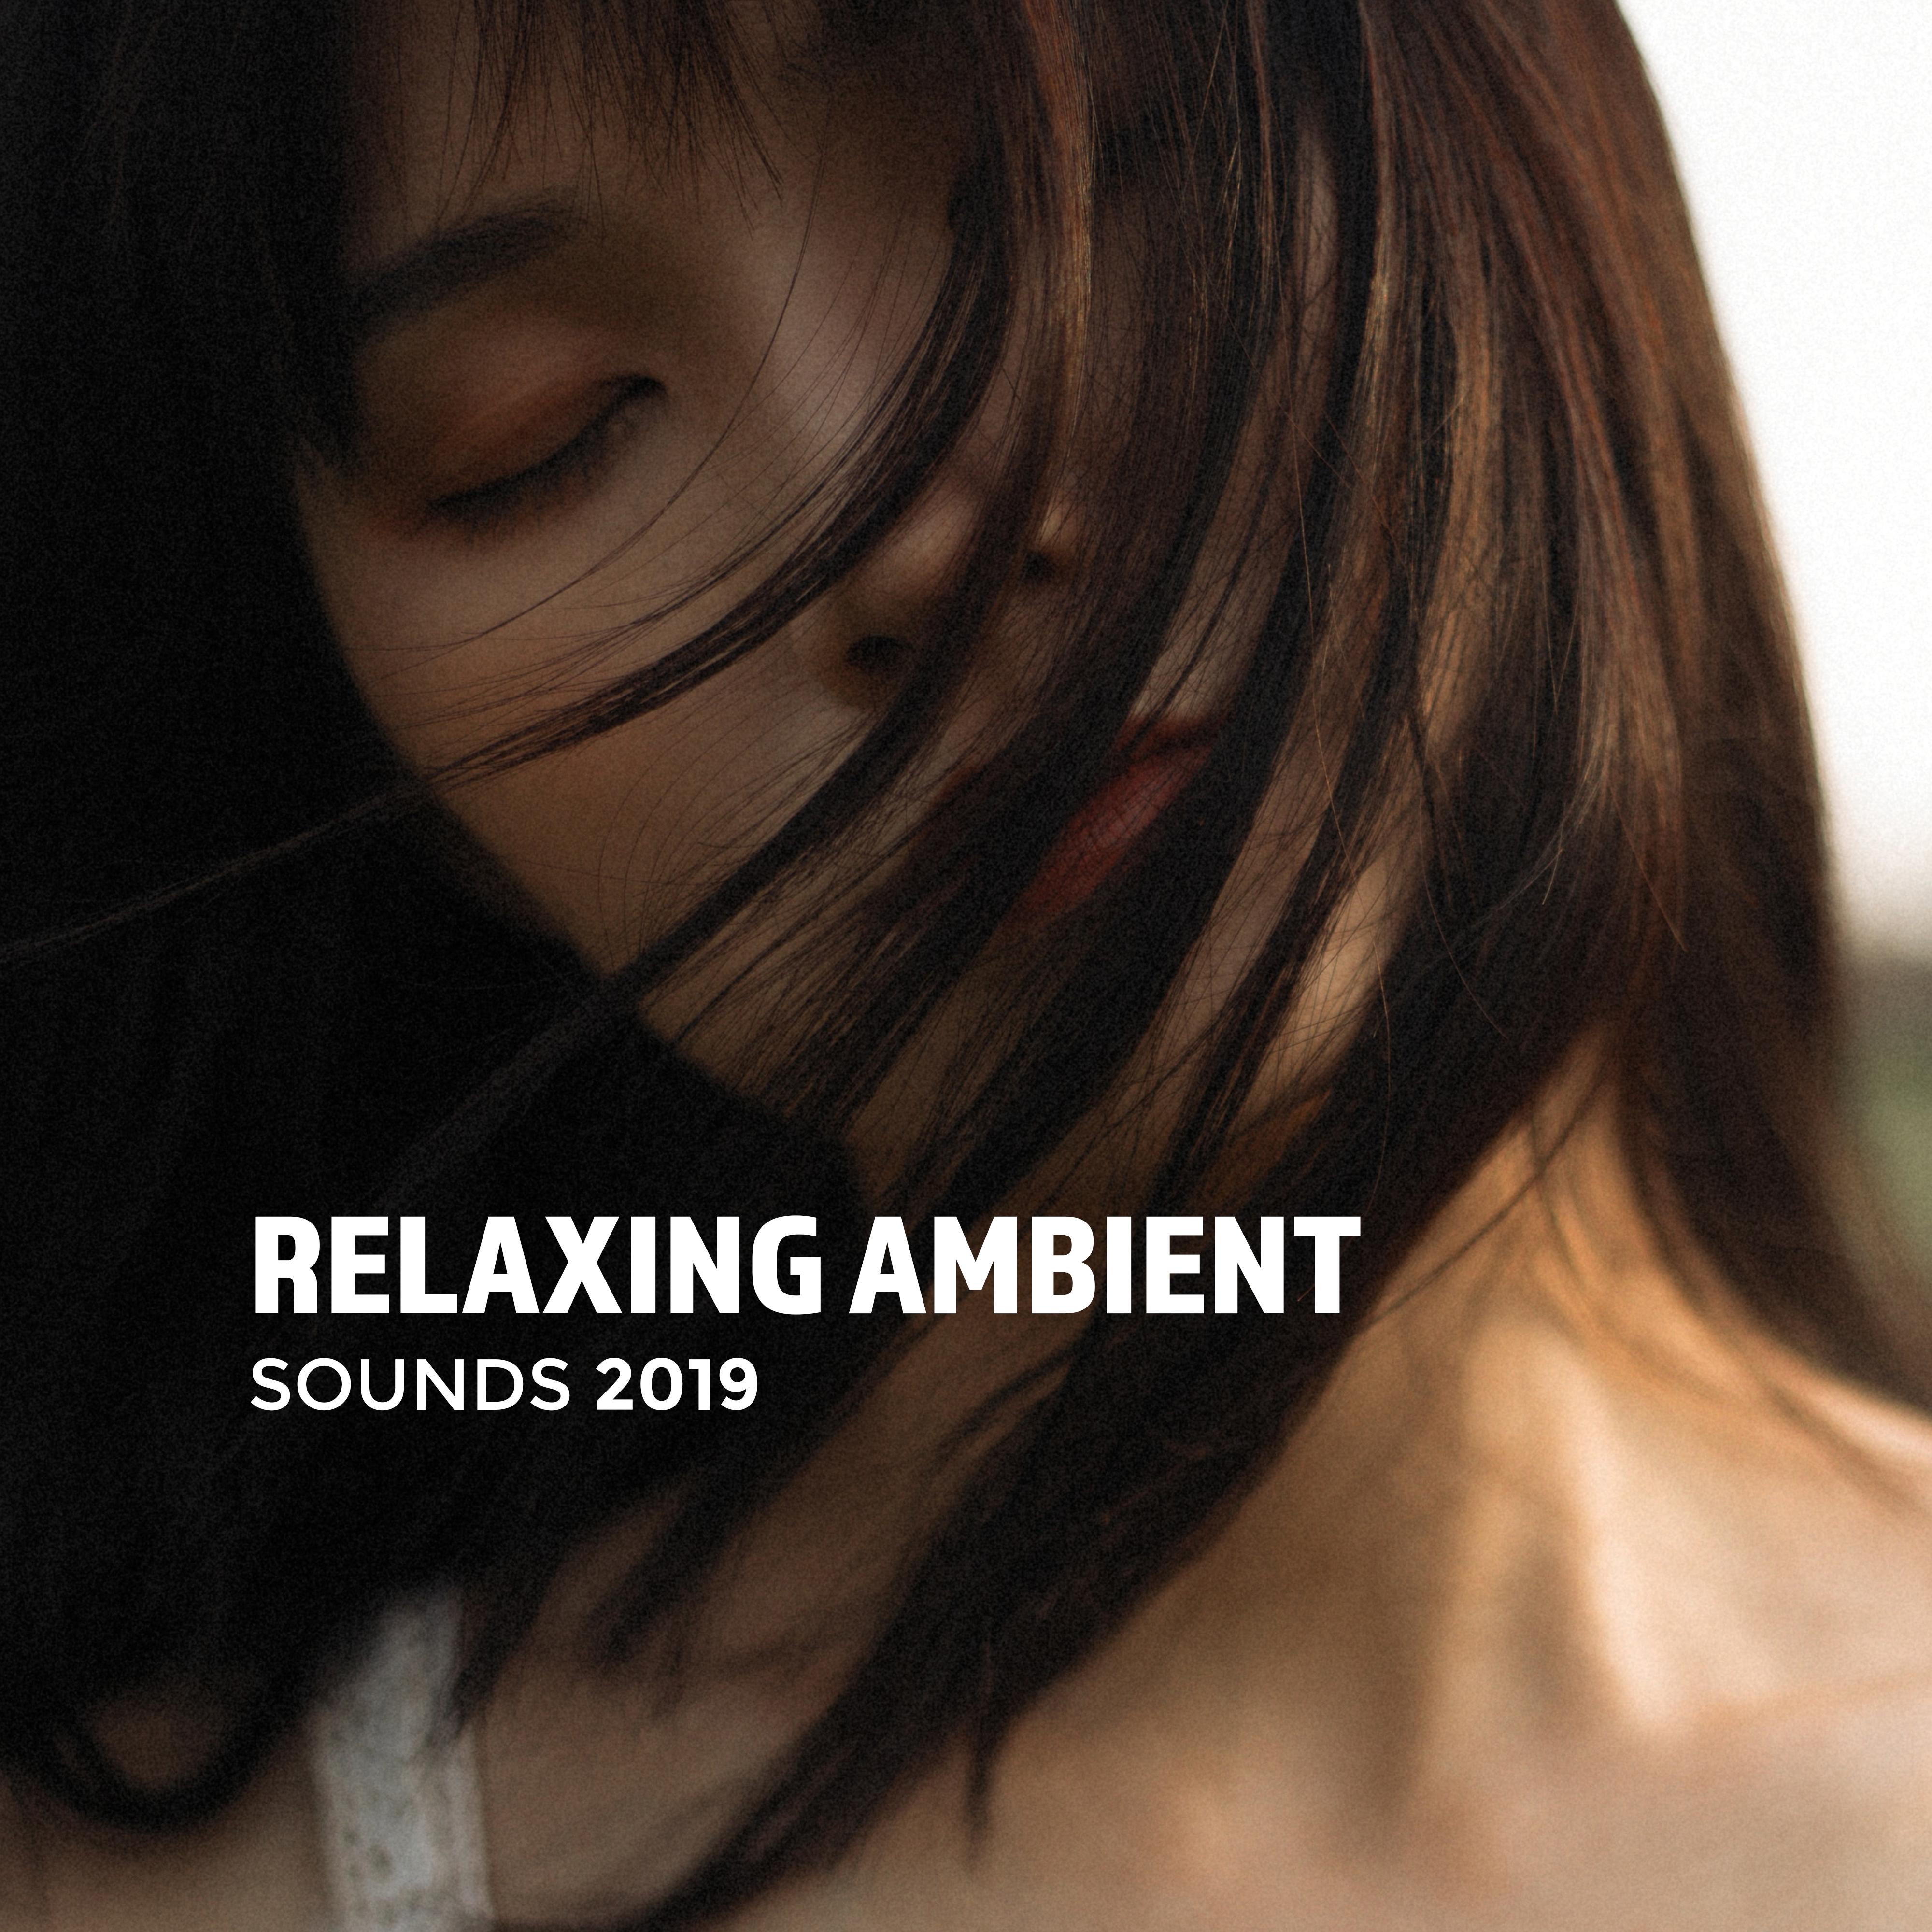 Relaxing Ambient Sounds 2019